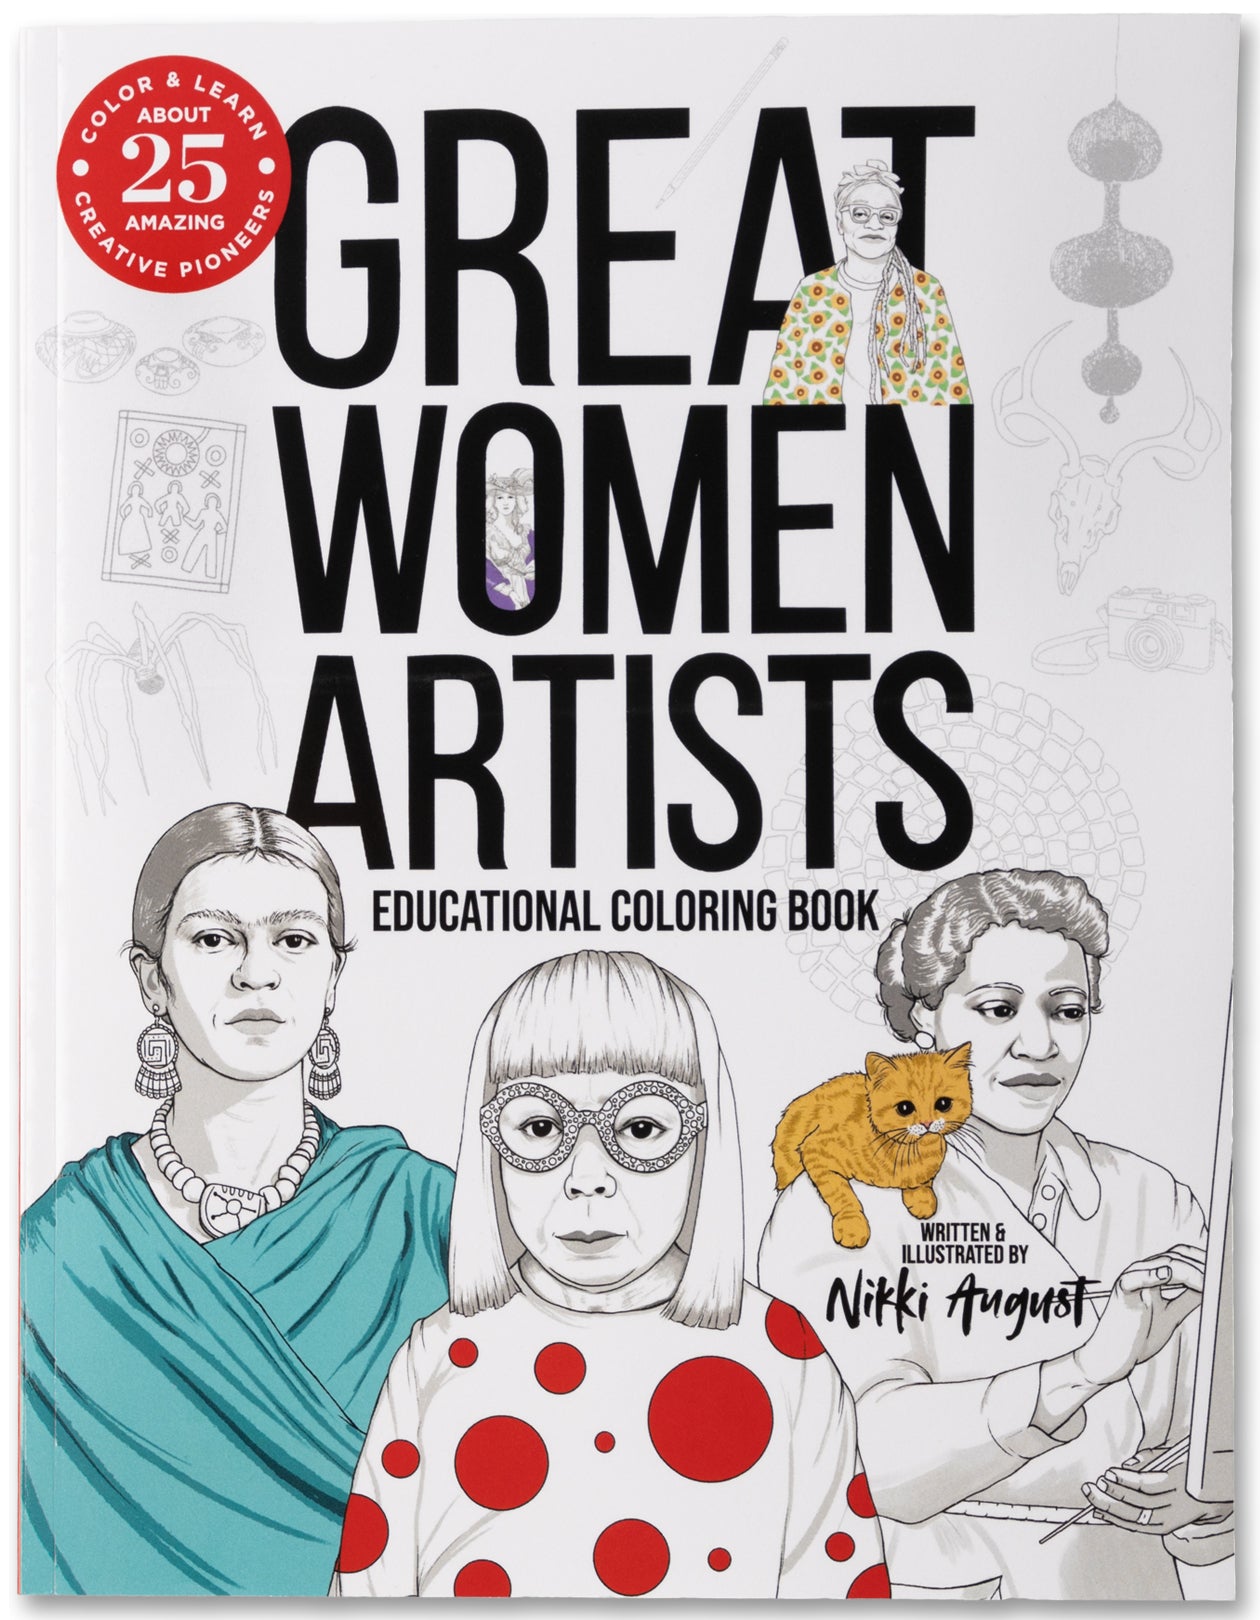 Great Women Artists Educational Coloring Book: 25 Female Artists Throughout Art History [Book]